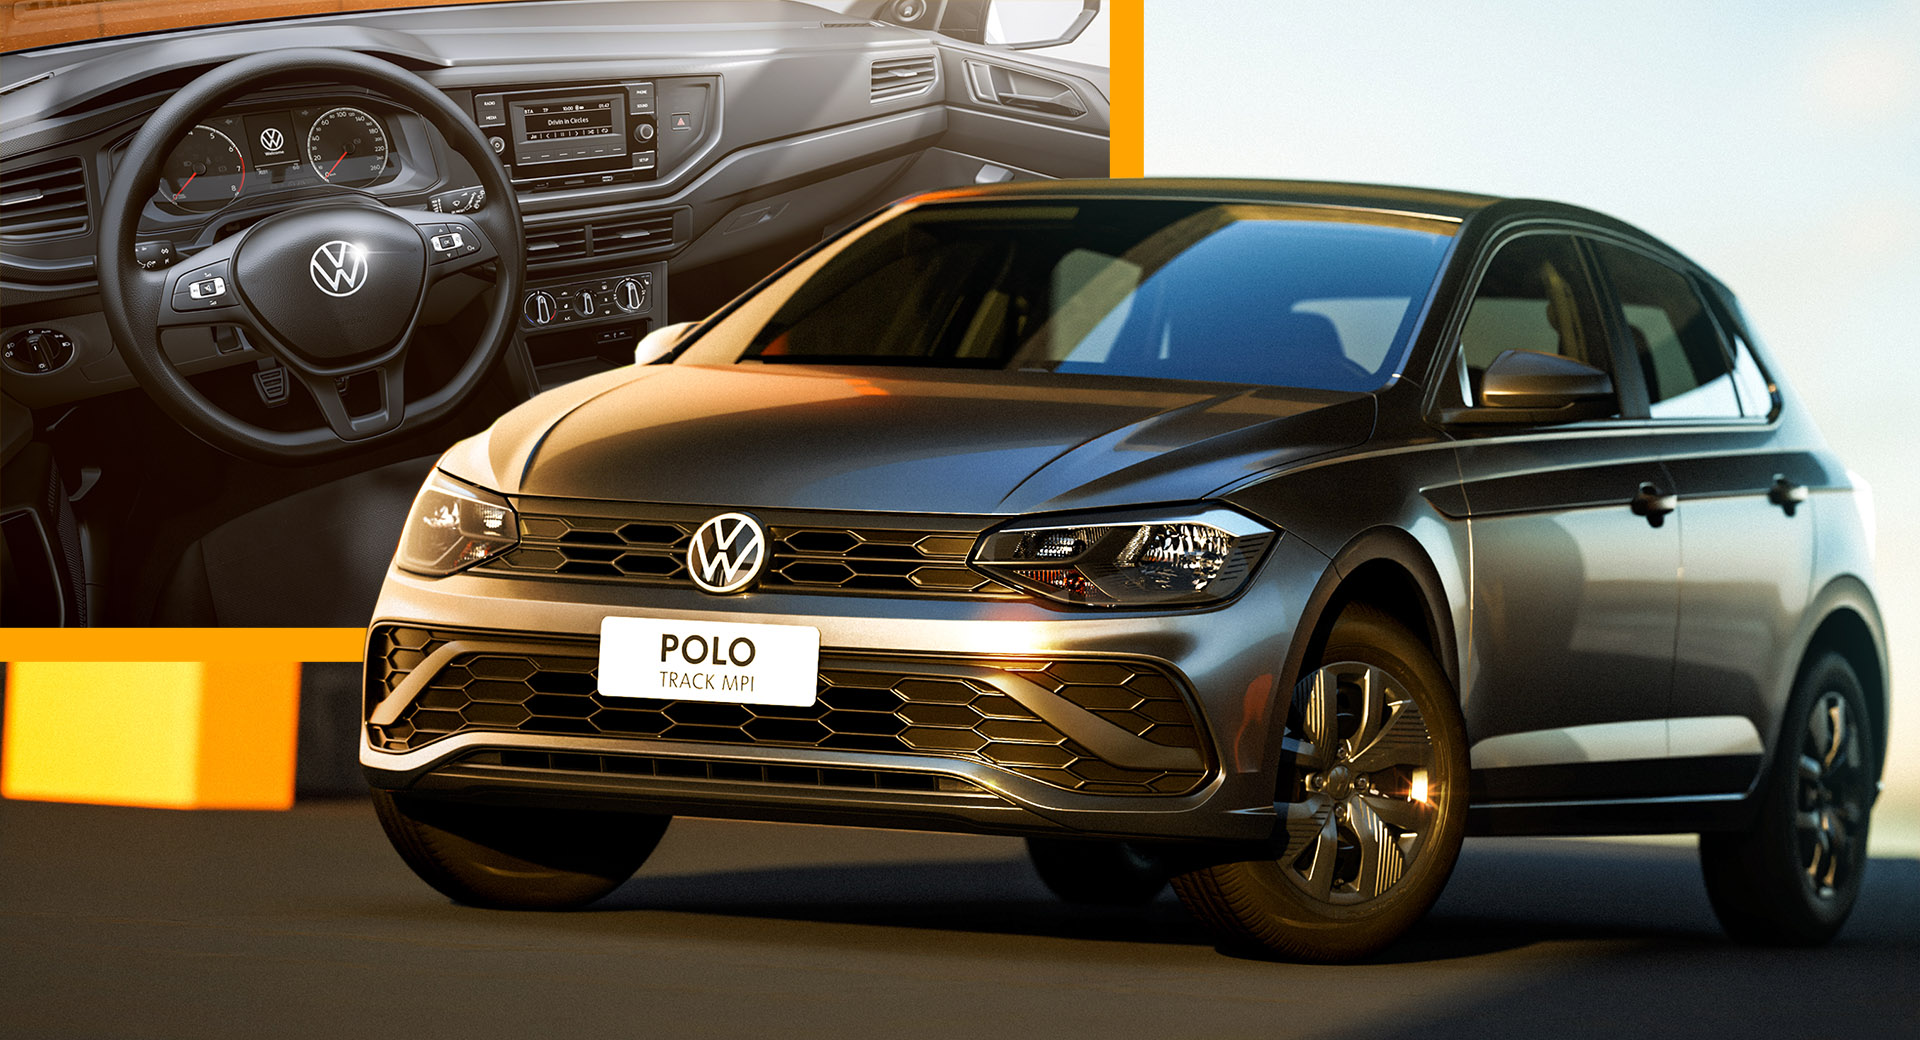 New VW Polo Track The Gol As A Budget-Friendly Hatch South | Carscoops